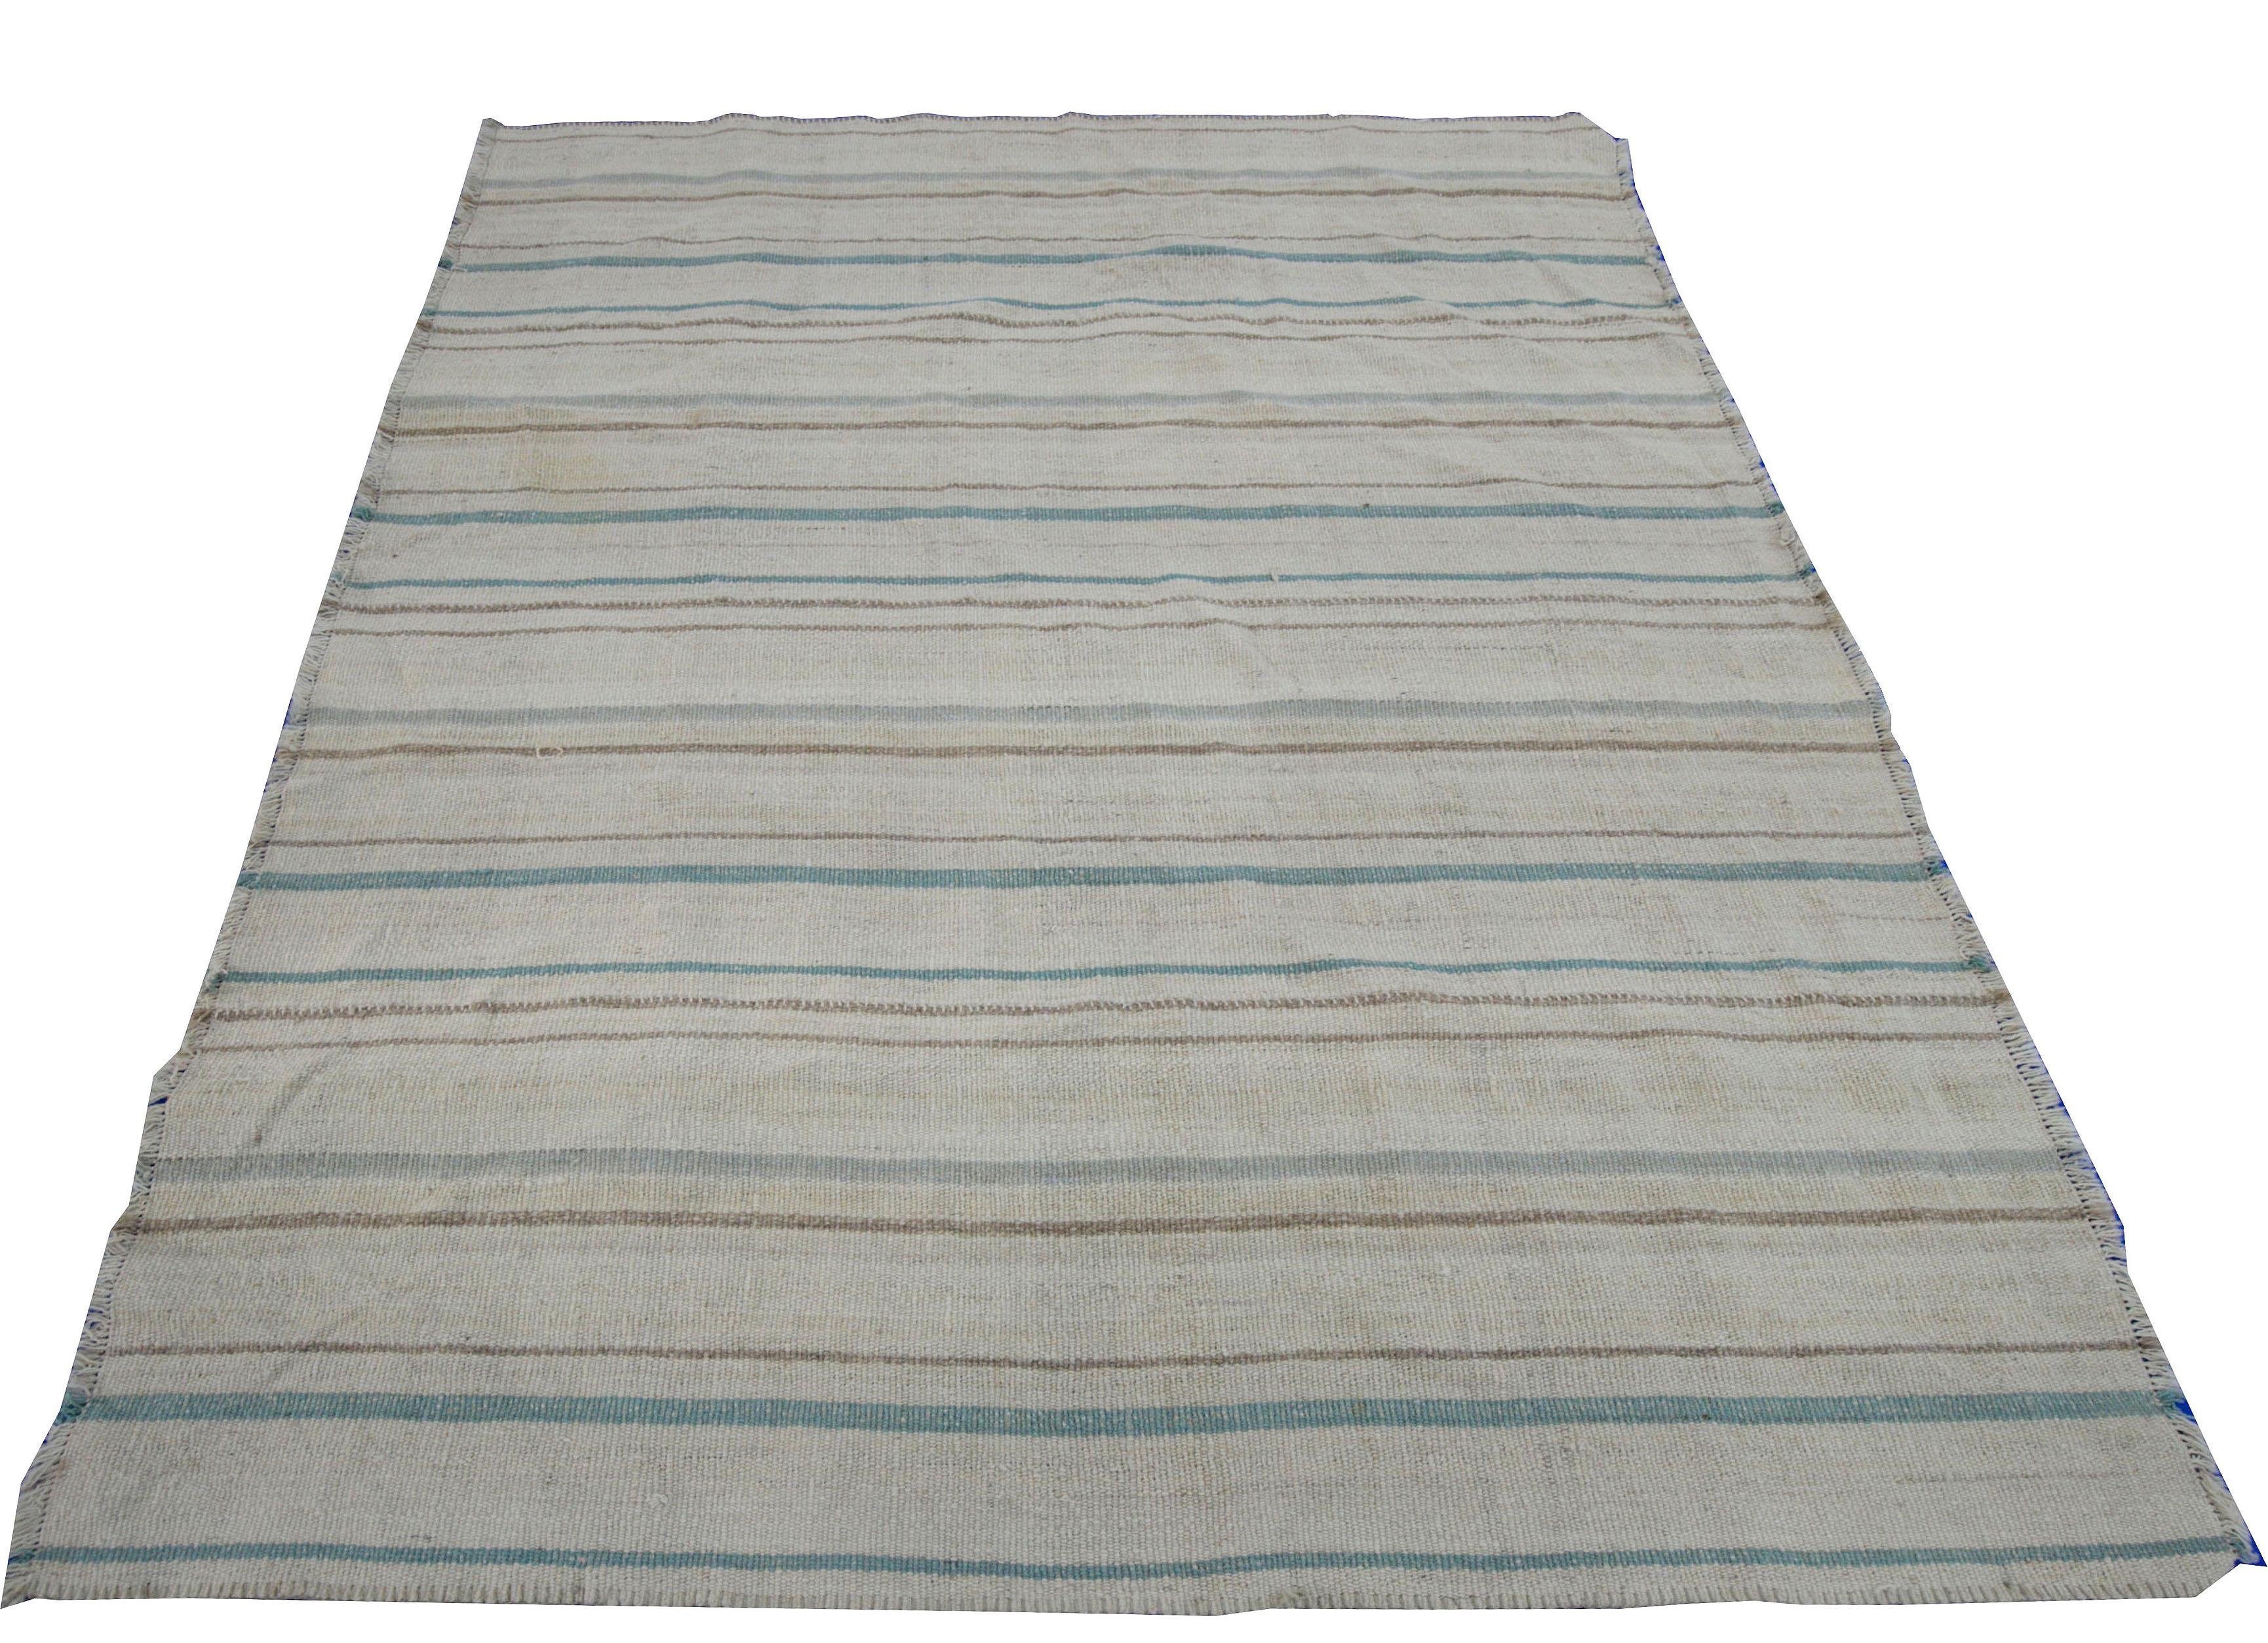 A new production Turkish rug handwoven from the finest sheep’s wool and colored with all-natural vegetable dyes that are safe for humans and pets. It’s a traditional Kilim flat-weave design featuring a beautiful beige field with green and brown